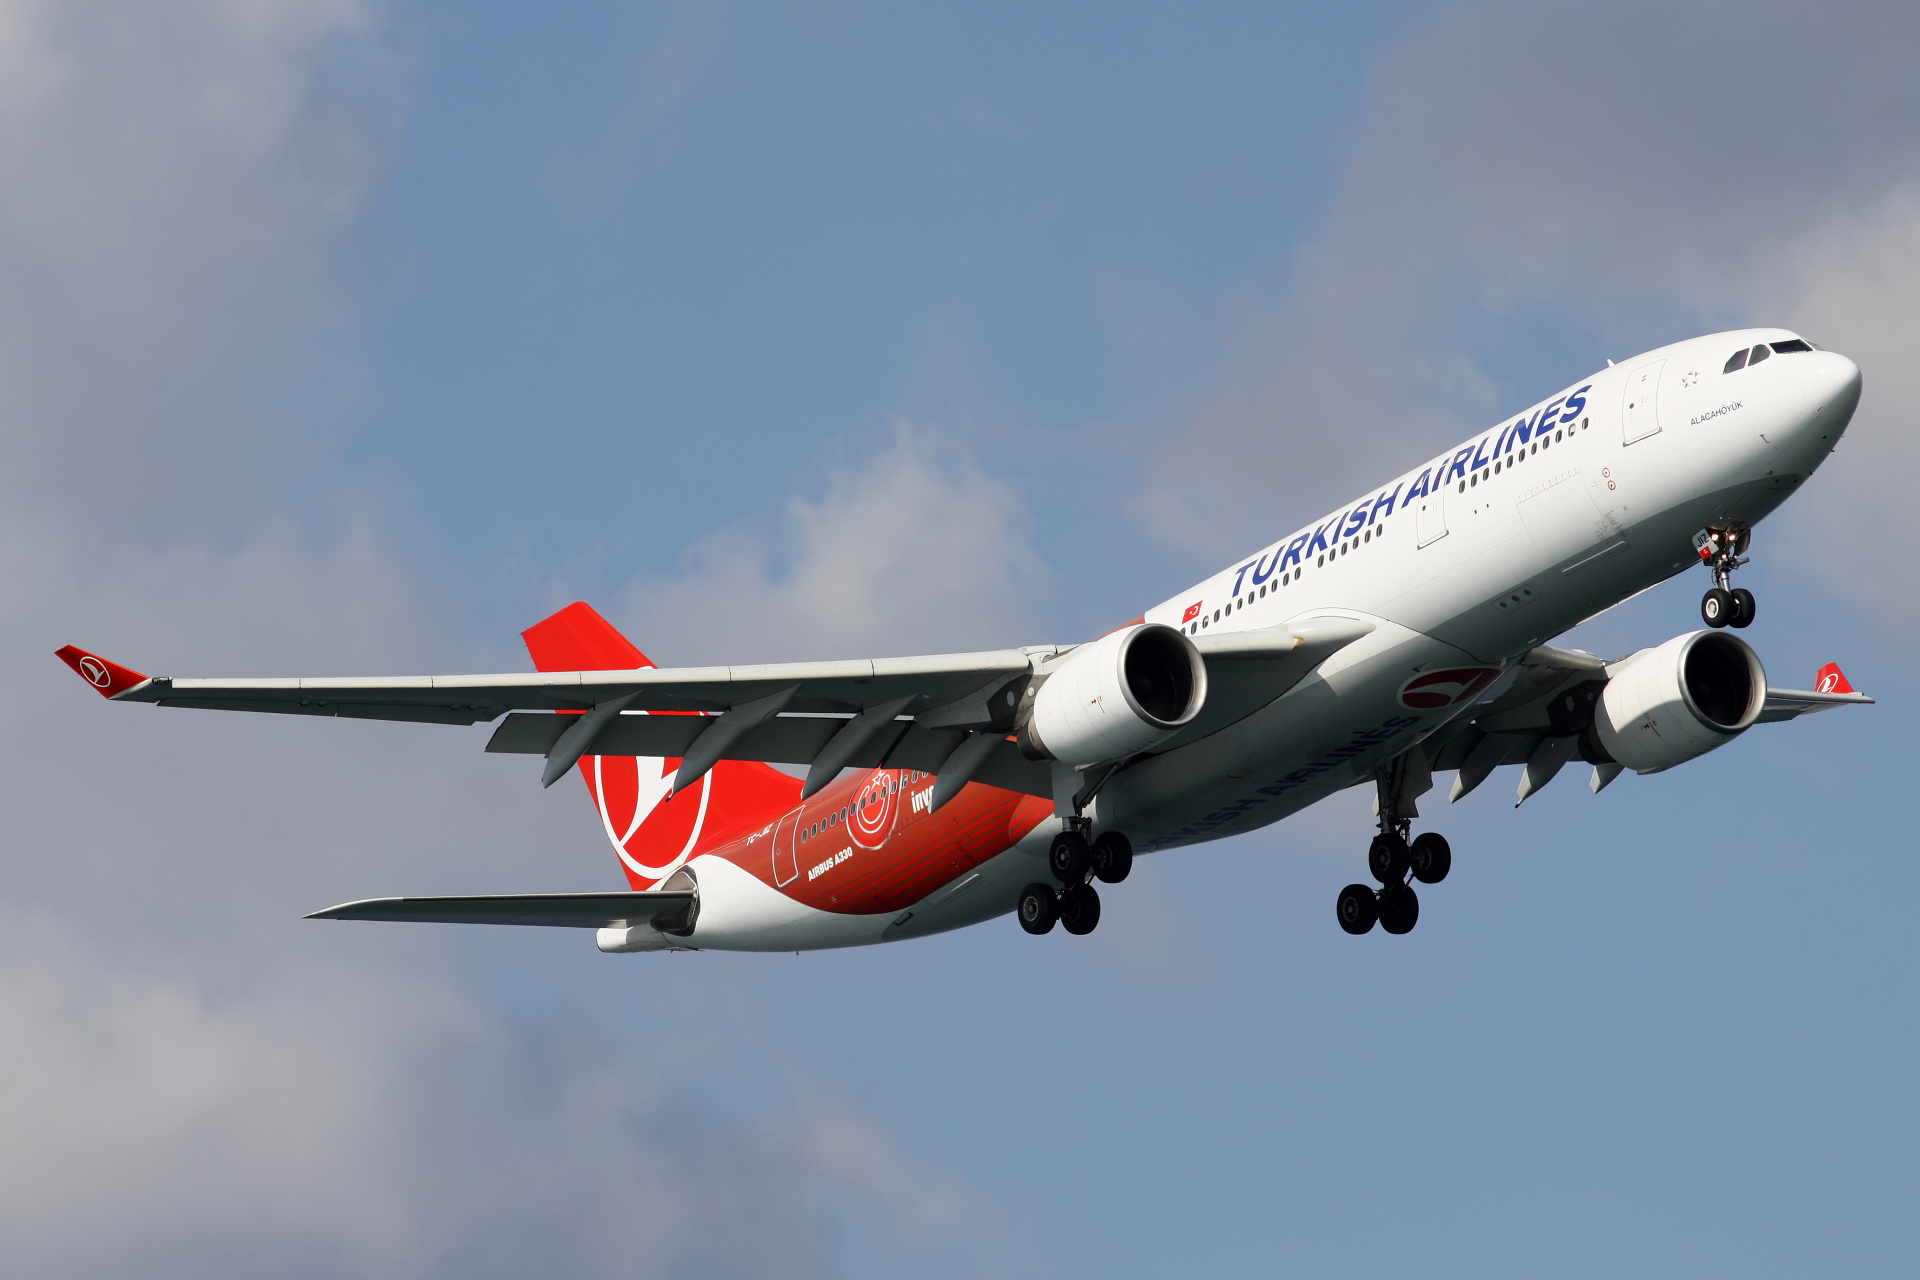 TC-JIZ (Invest in Turkey livery) (Aircraft » Istanbul Atatürk Airport » Airbus A330-200 » THY Turkish Airlines)